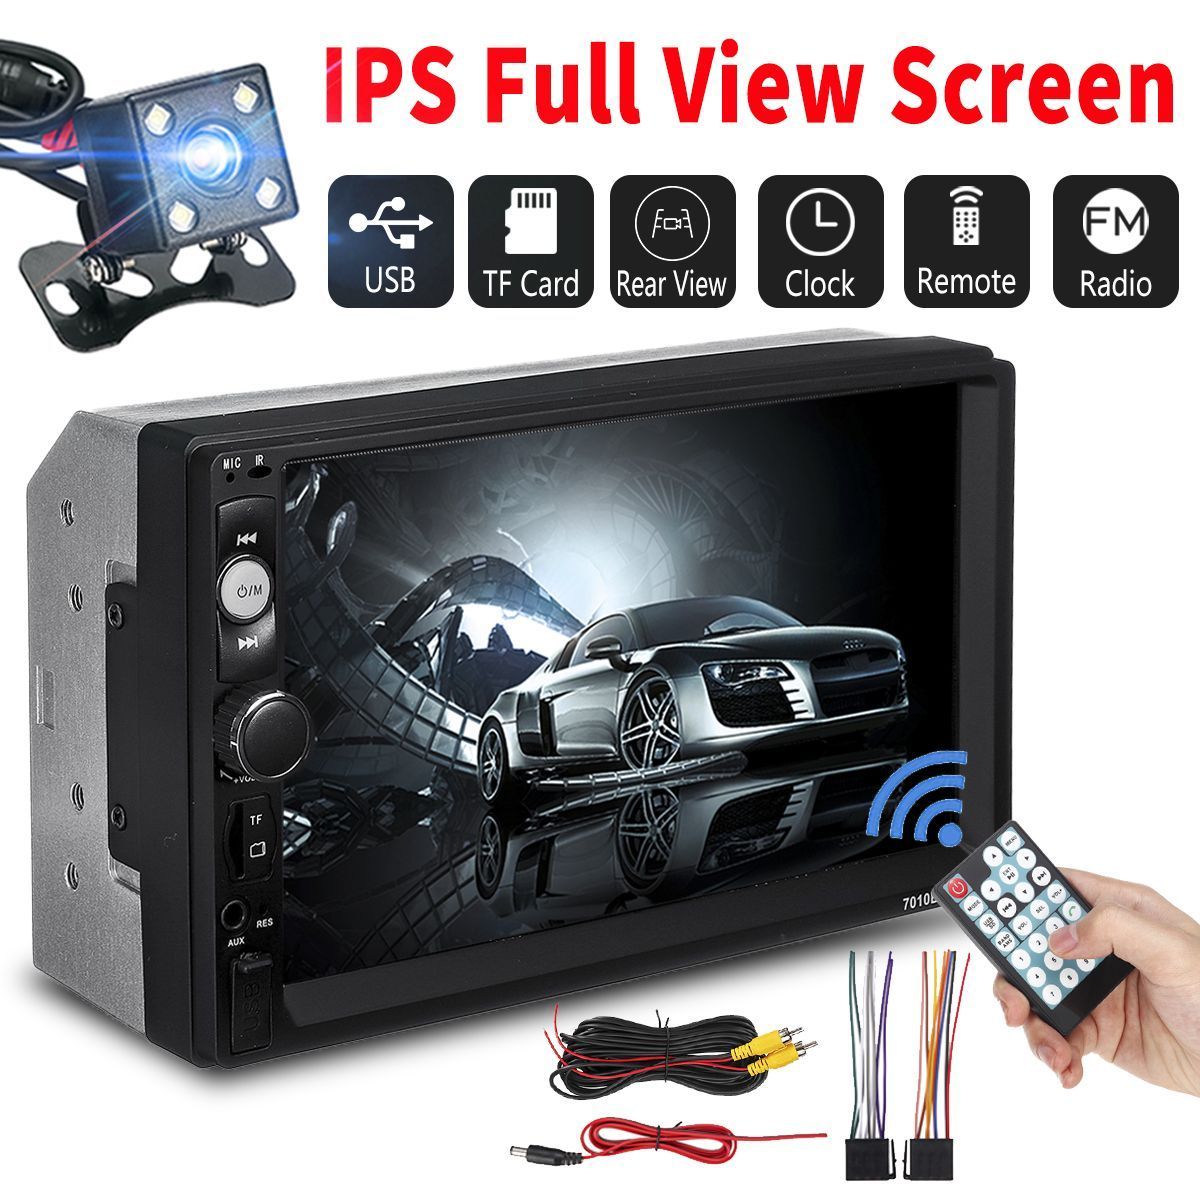 7010B-7-Inch-2Din-Car-MP5-Player-IPS-Touch-Screen-Stereo-FM-Radio-bluetooth-with-Rear-View-Camera-1491076